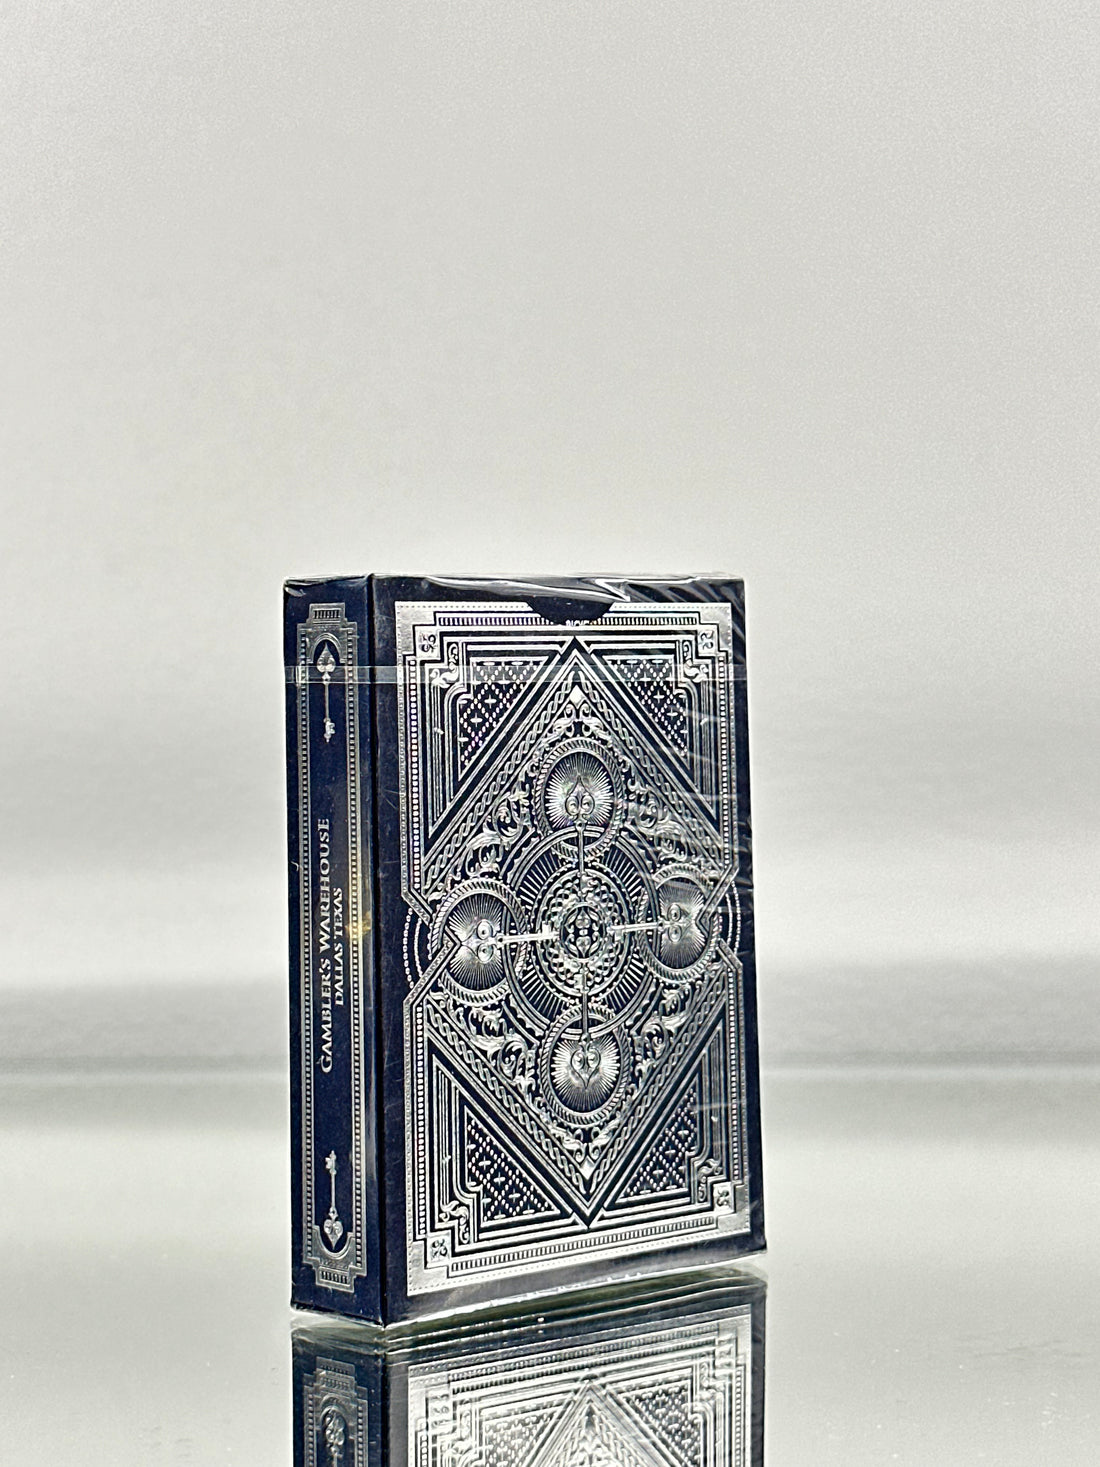 Bicycle Spirit Blue Silver Edition Playing Cards